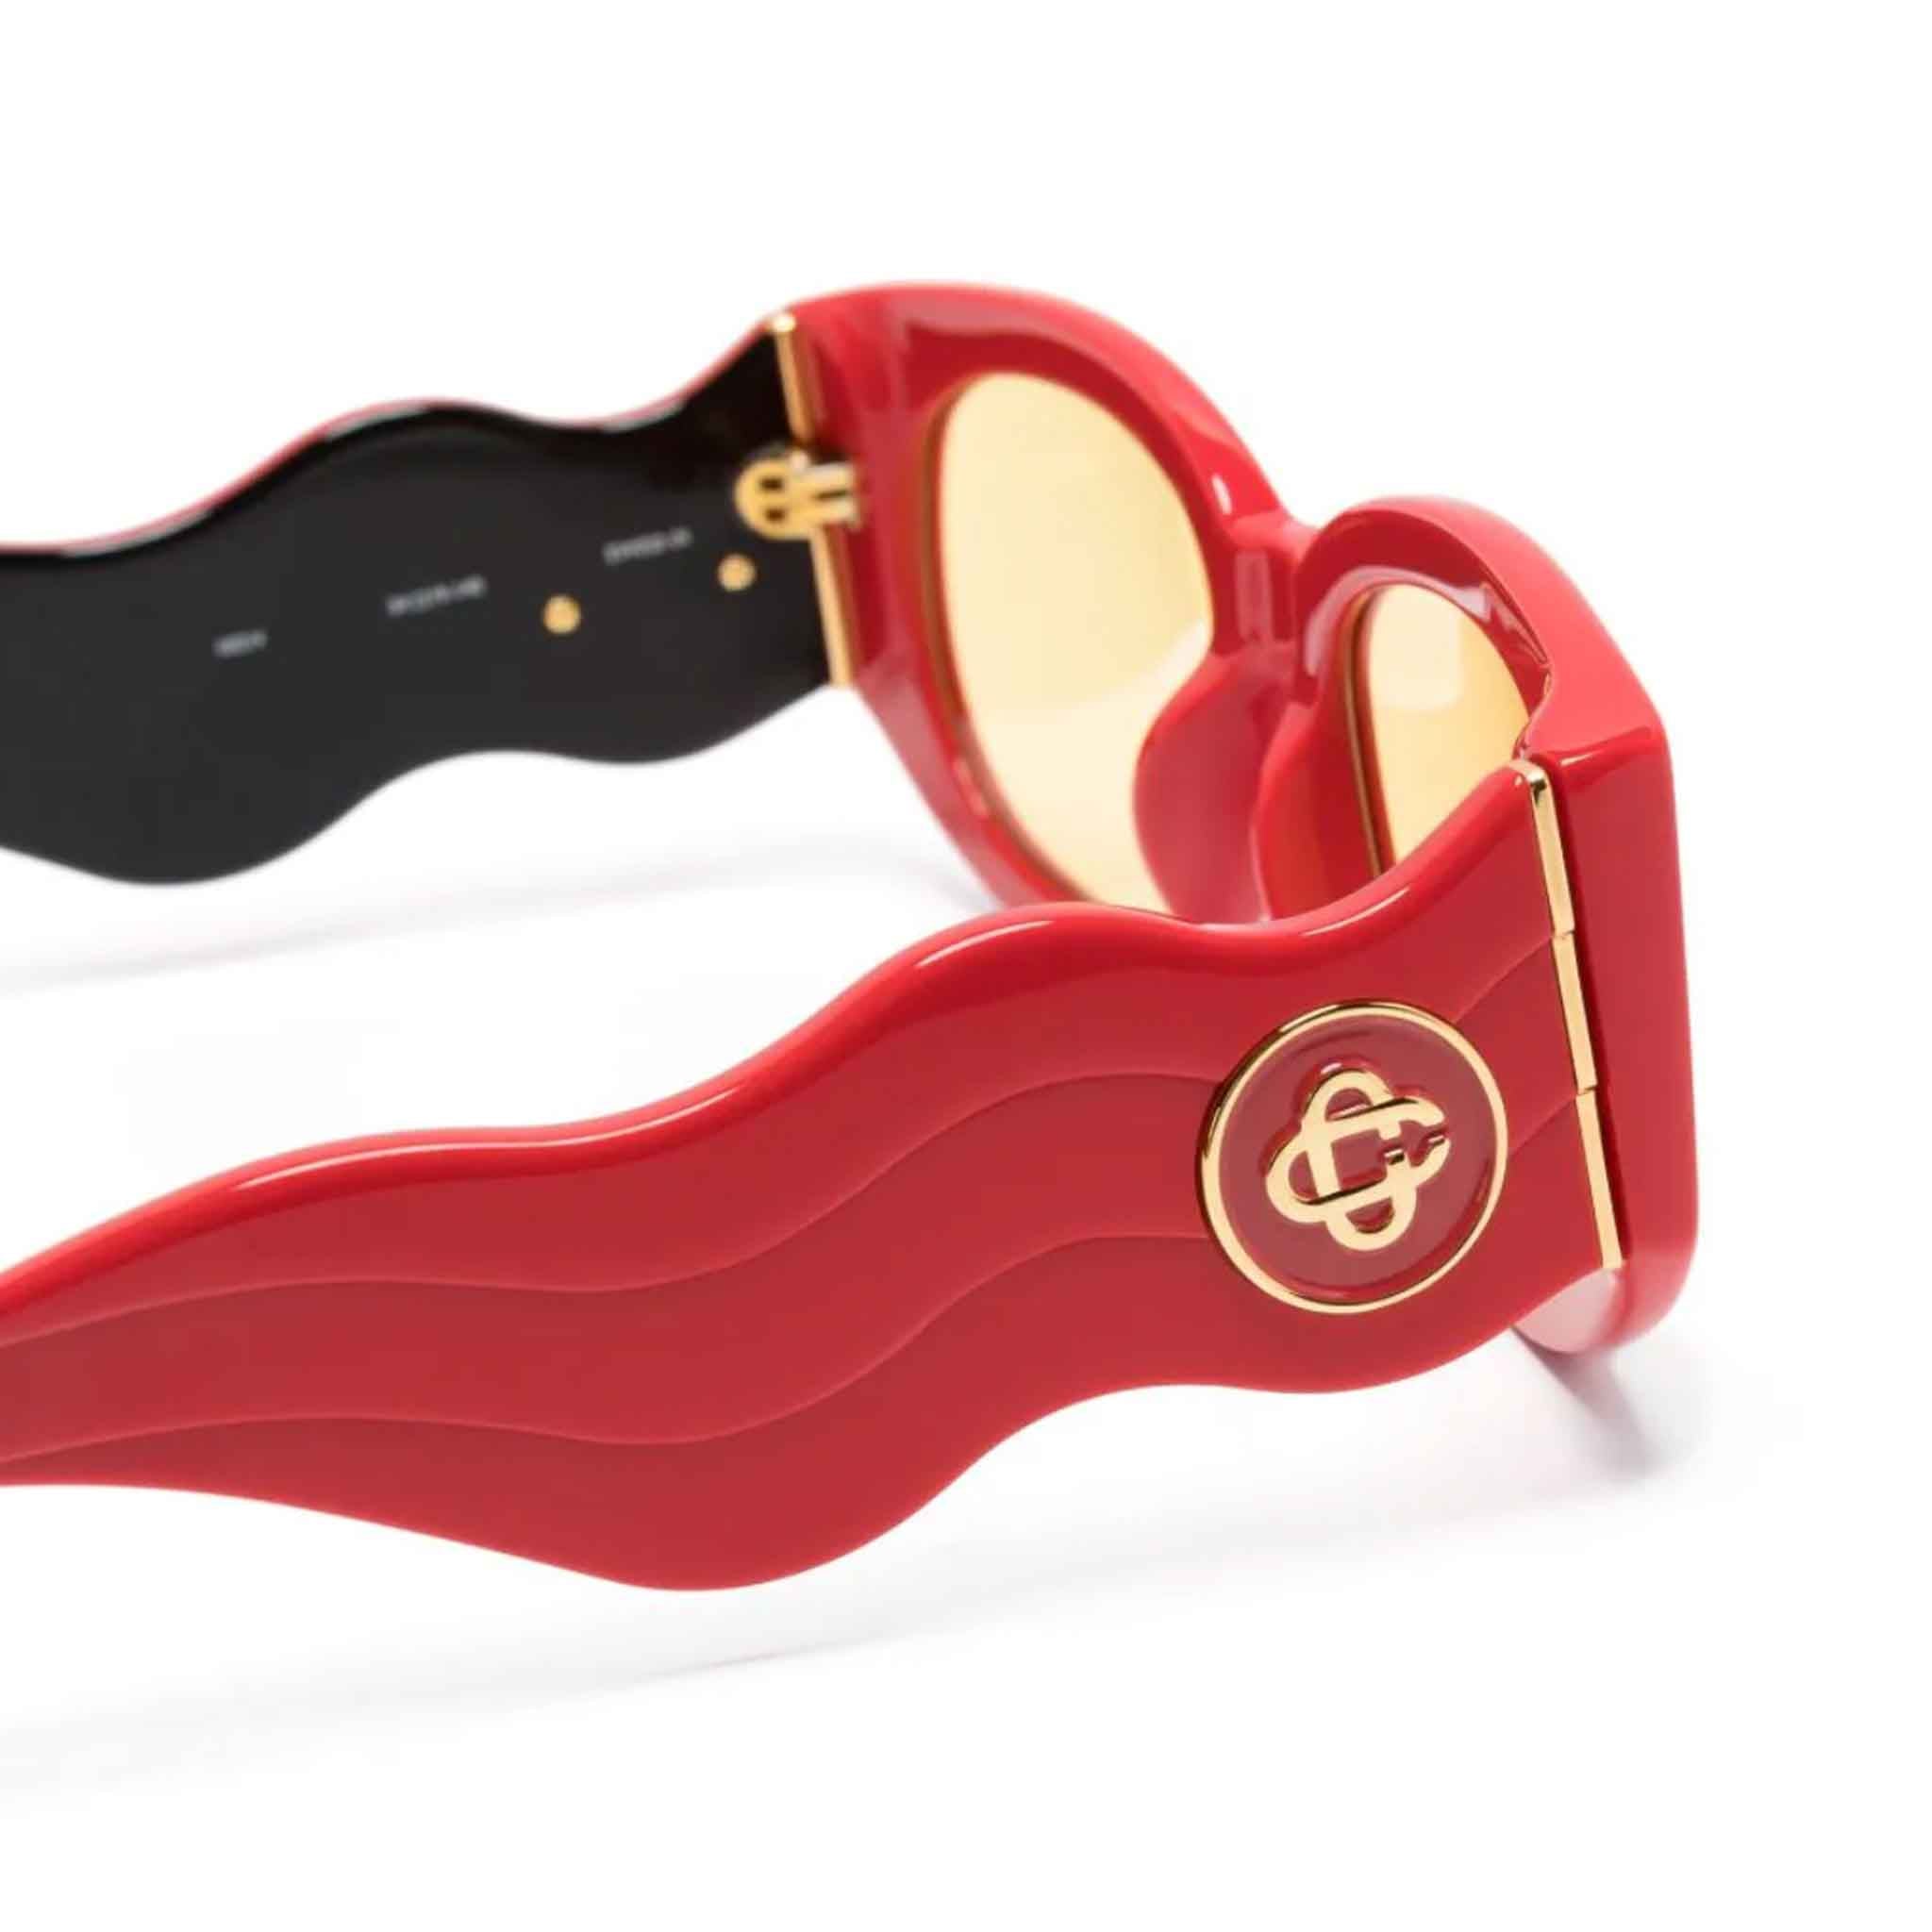 Casablanca Acetate & Metal Wave Oval Sunglasses in Red/Gold